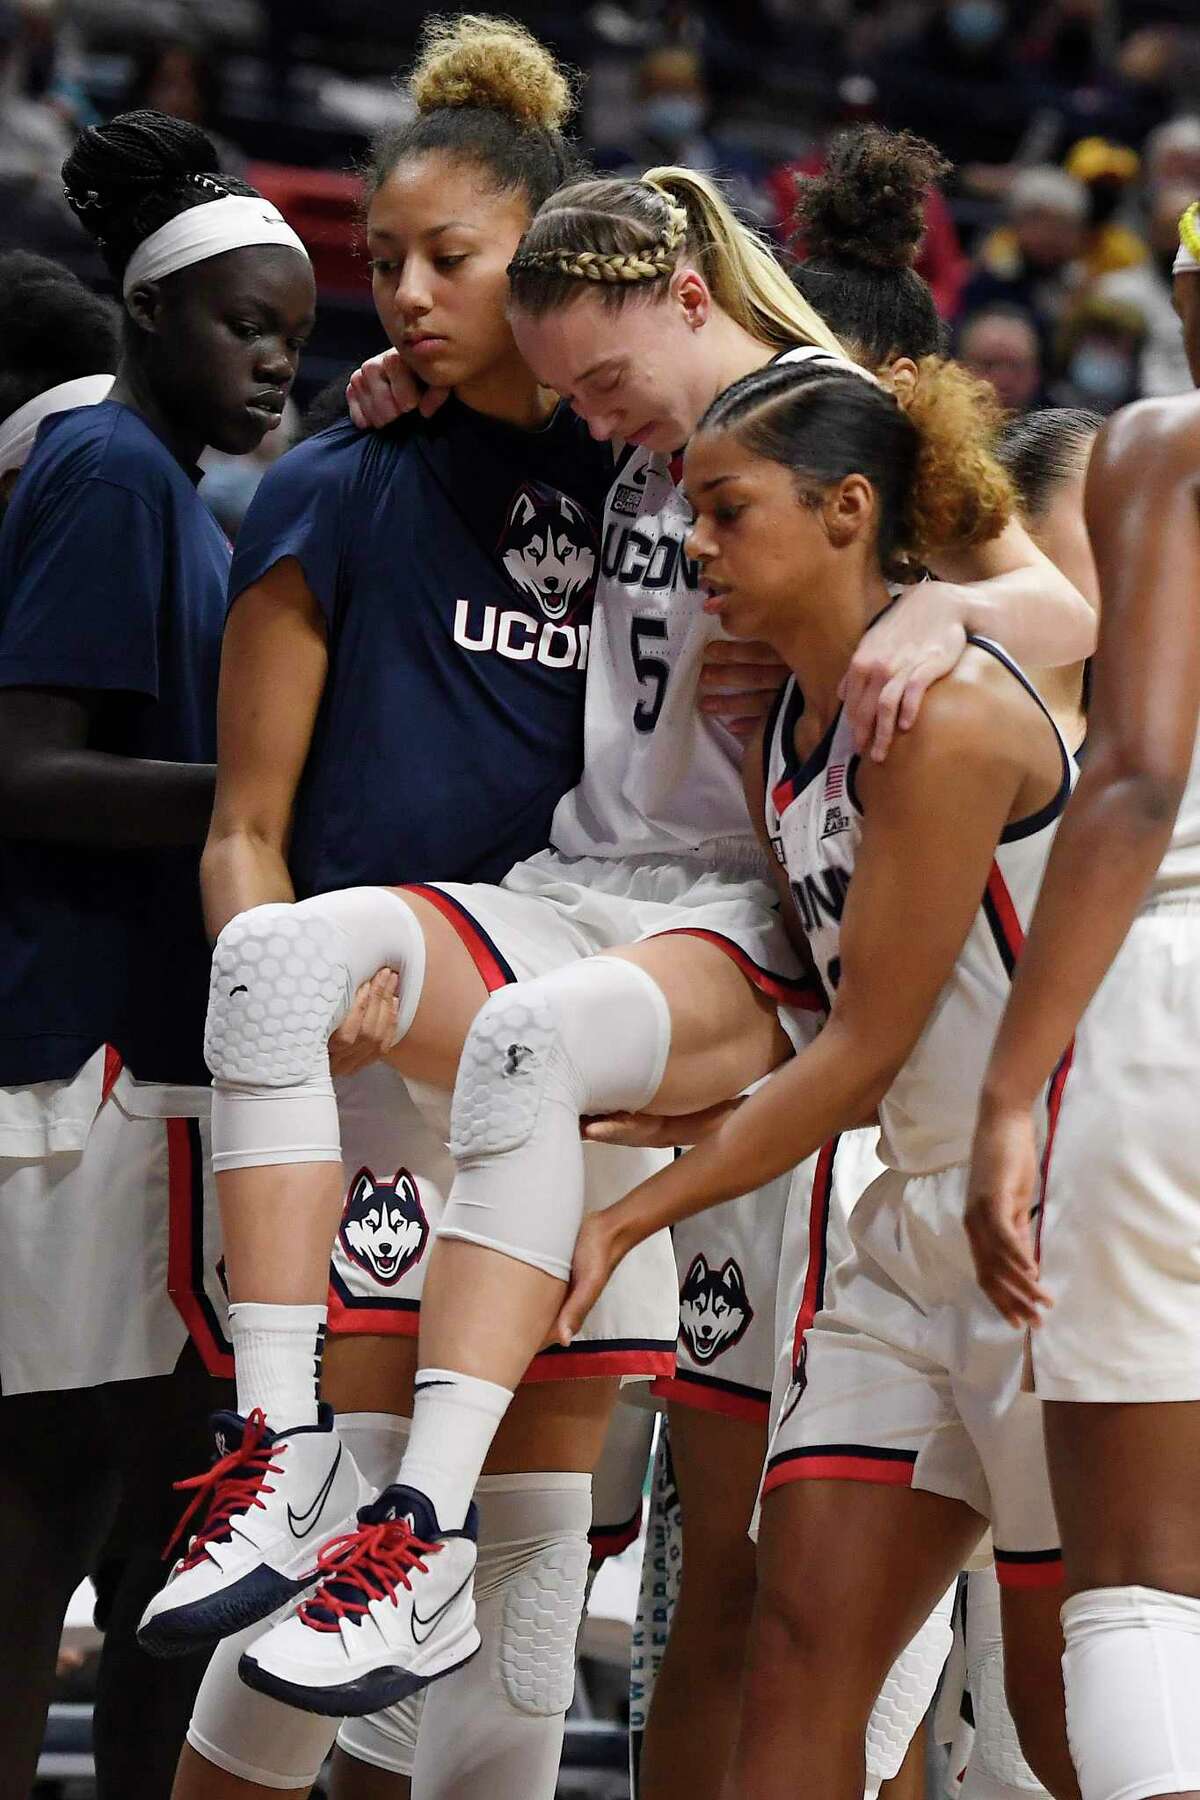 Connecticut's Paige Bueckers, center, is helped off the court by Amari DeBerry, left, and Evina Westbrook in the second half of an NCAA college basketball game against Notre Dame, Sunday, Dec. 5, 2021, in Storrs.